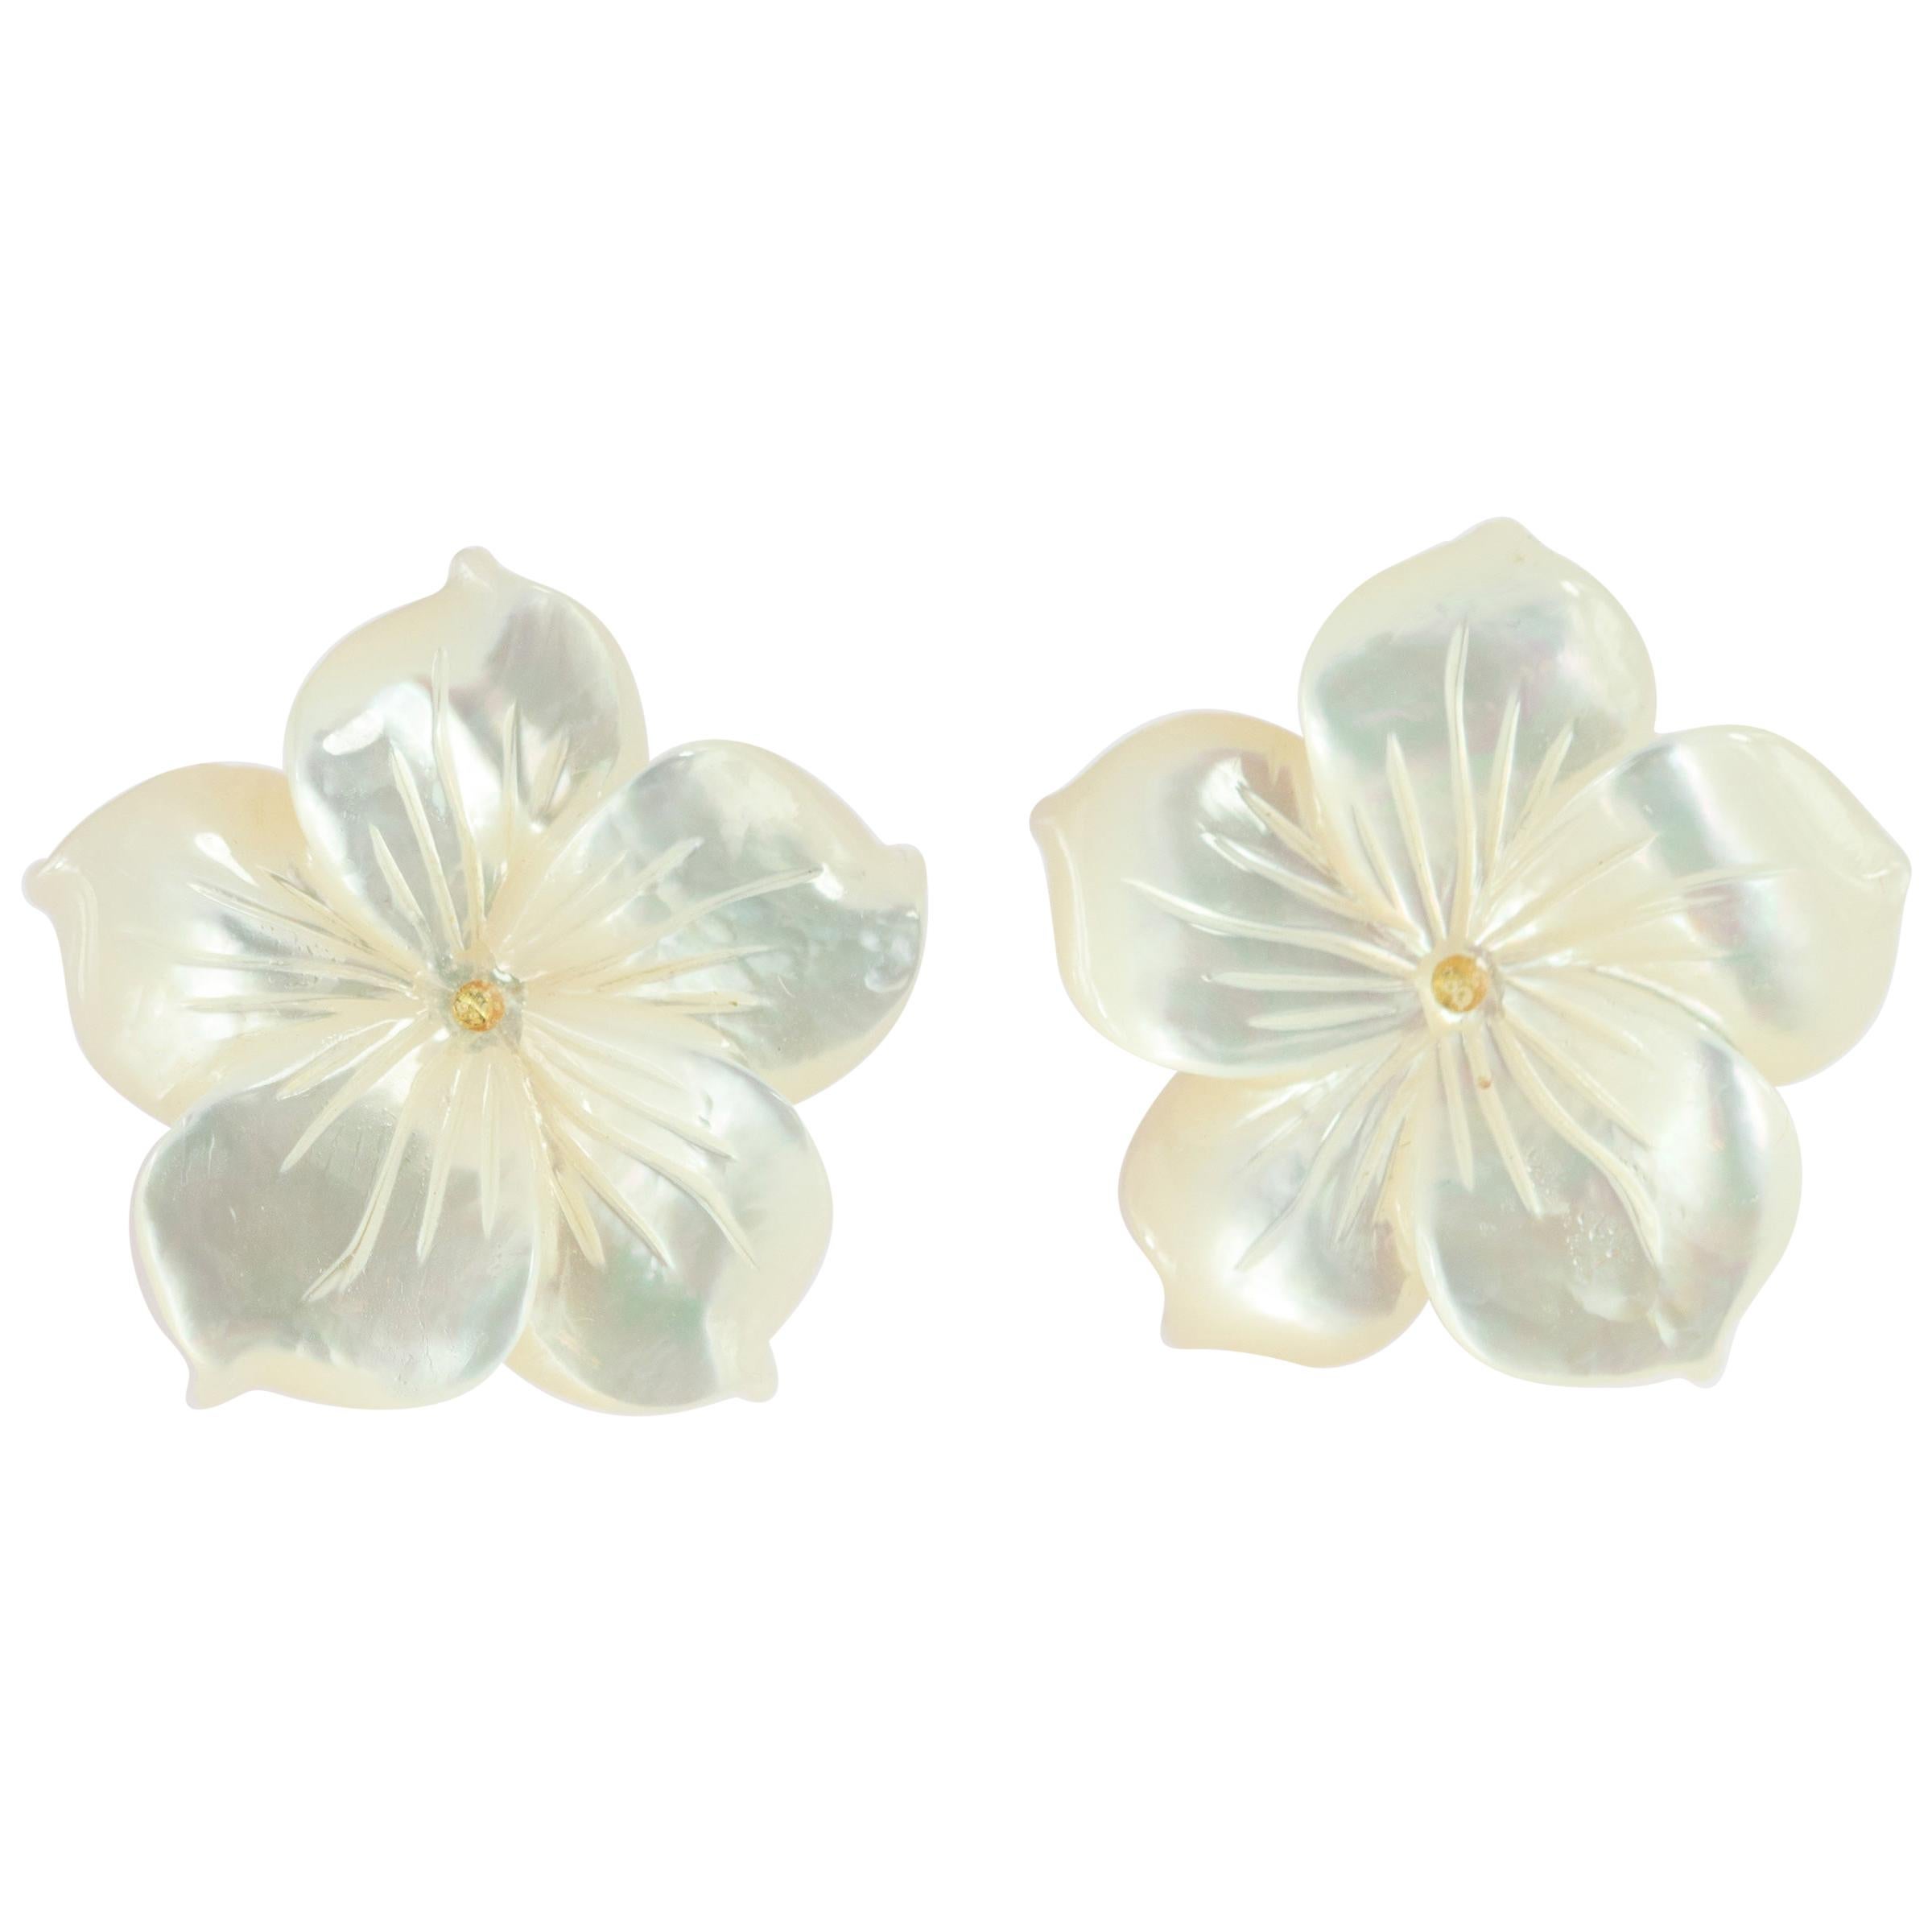 Intini Jewels Mother of Pearl Carved White Flower 9 Karat Gold Stud Earrings For Sale